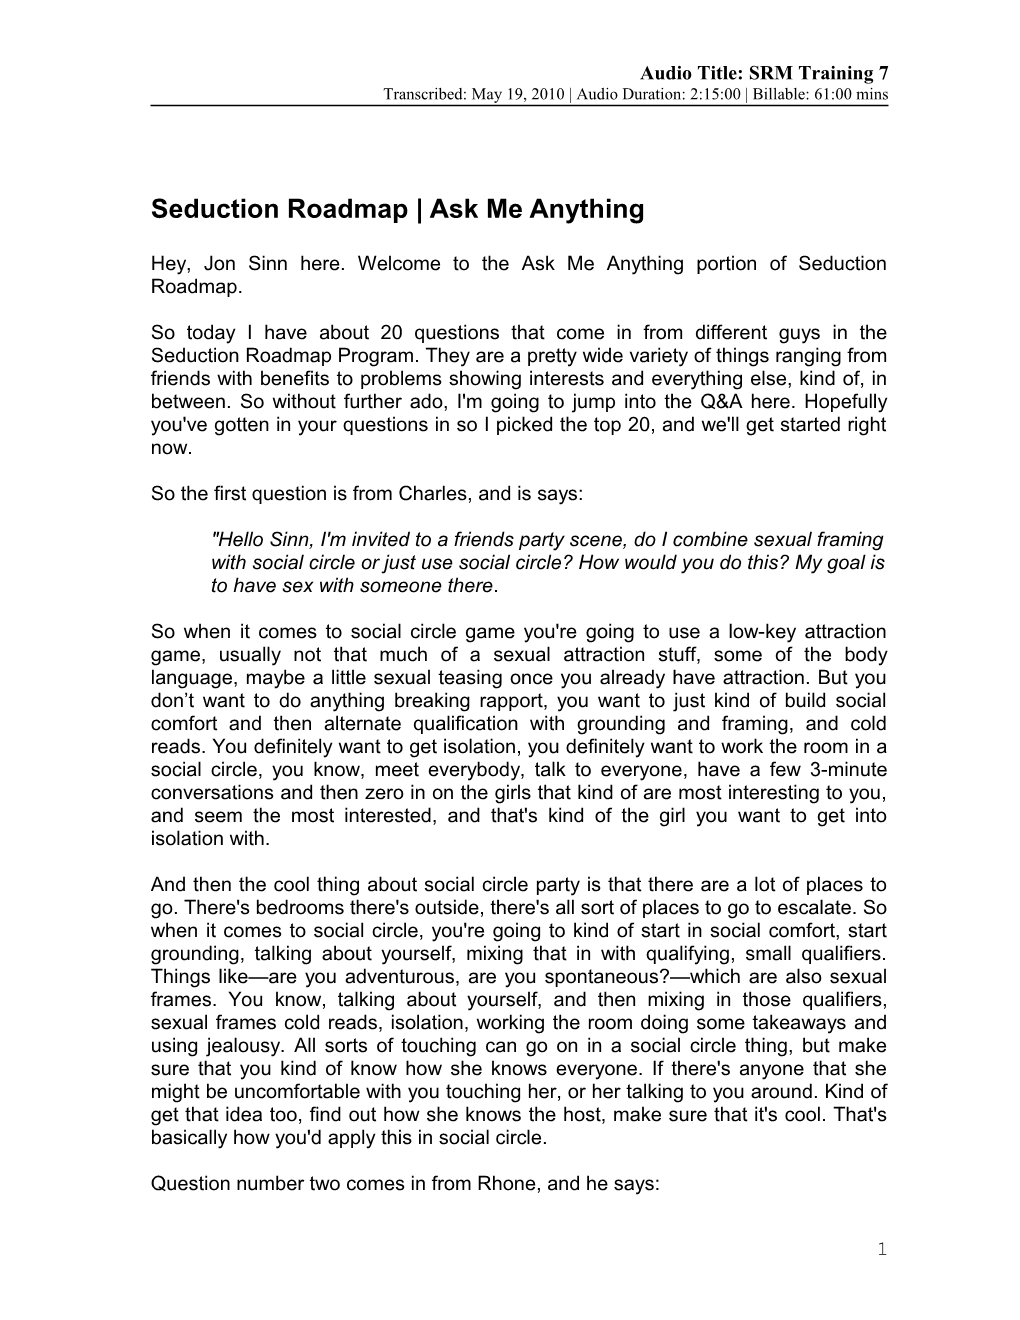 Seduction Roadmap Ask Me Anything